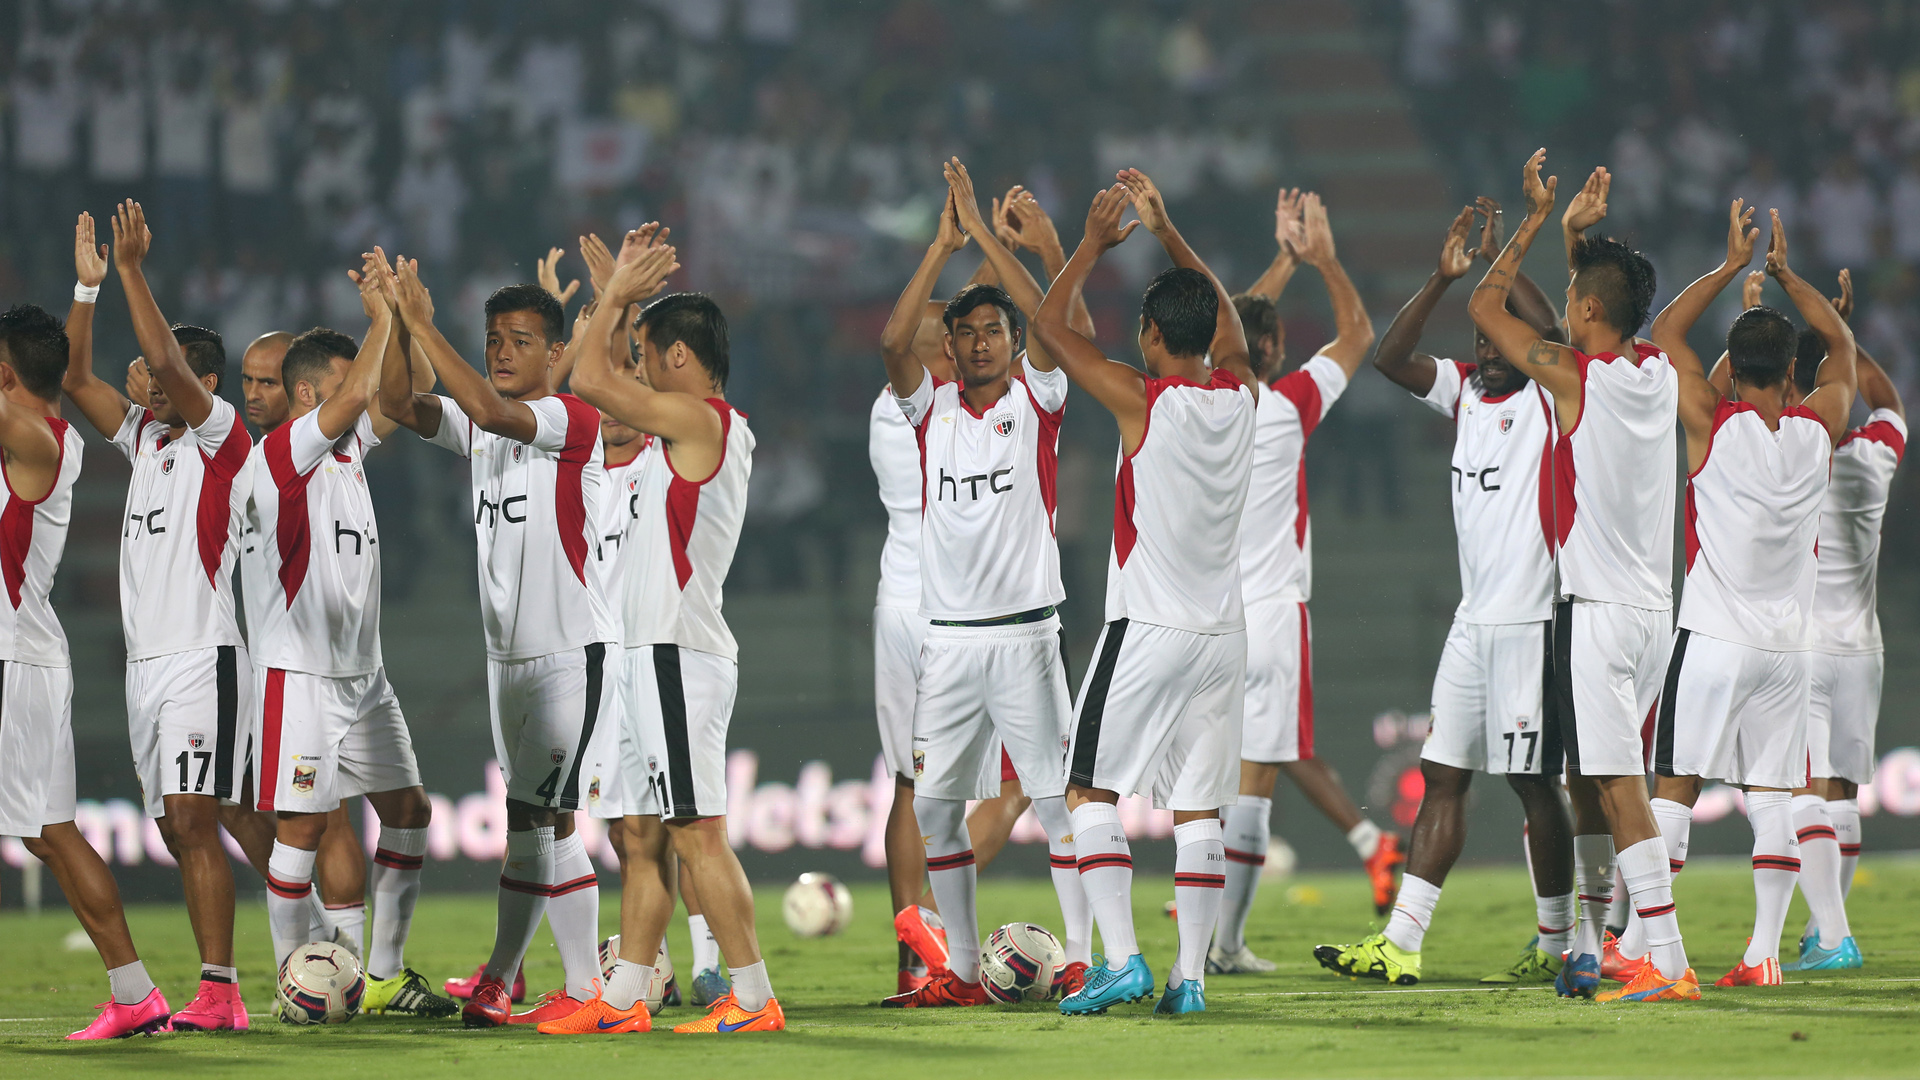 NorthEast United FC Players waves towards the crowd during the warm up session before the match 38 of the Indian Super League (ISL) season 2 between NorthEast United FC and Kerala Blasters FC held at the Indira Gandhi Stadium, Guwahati, India on the 15th November 2015. Photo by Deepak Malik / ISL/ SPORTZPICS